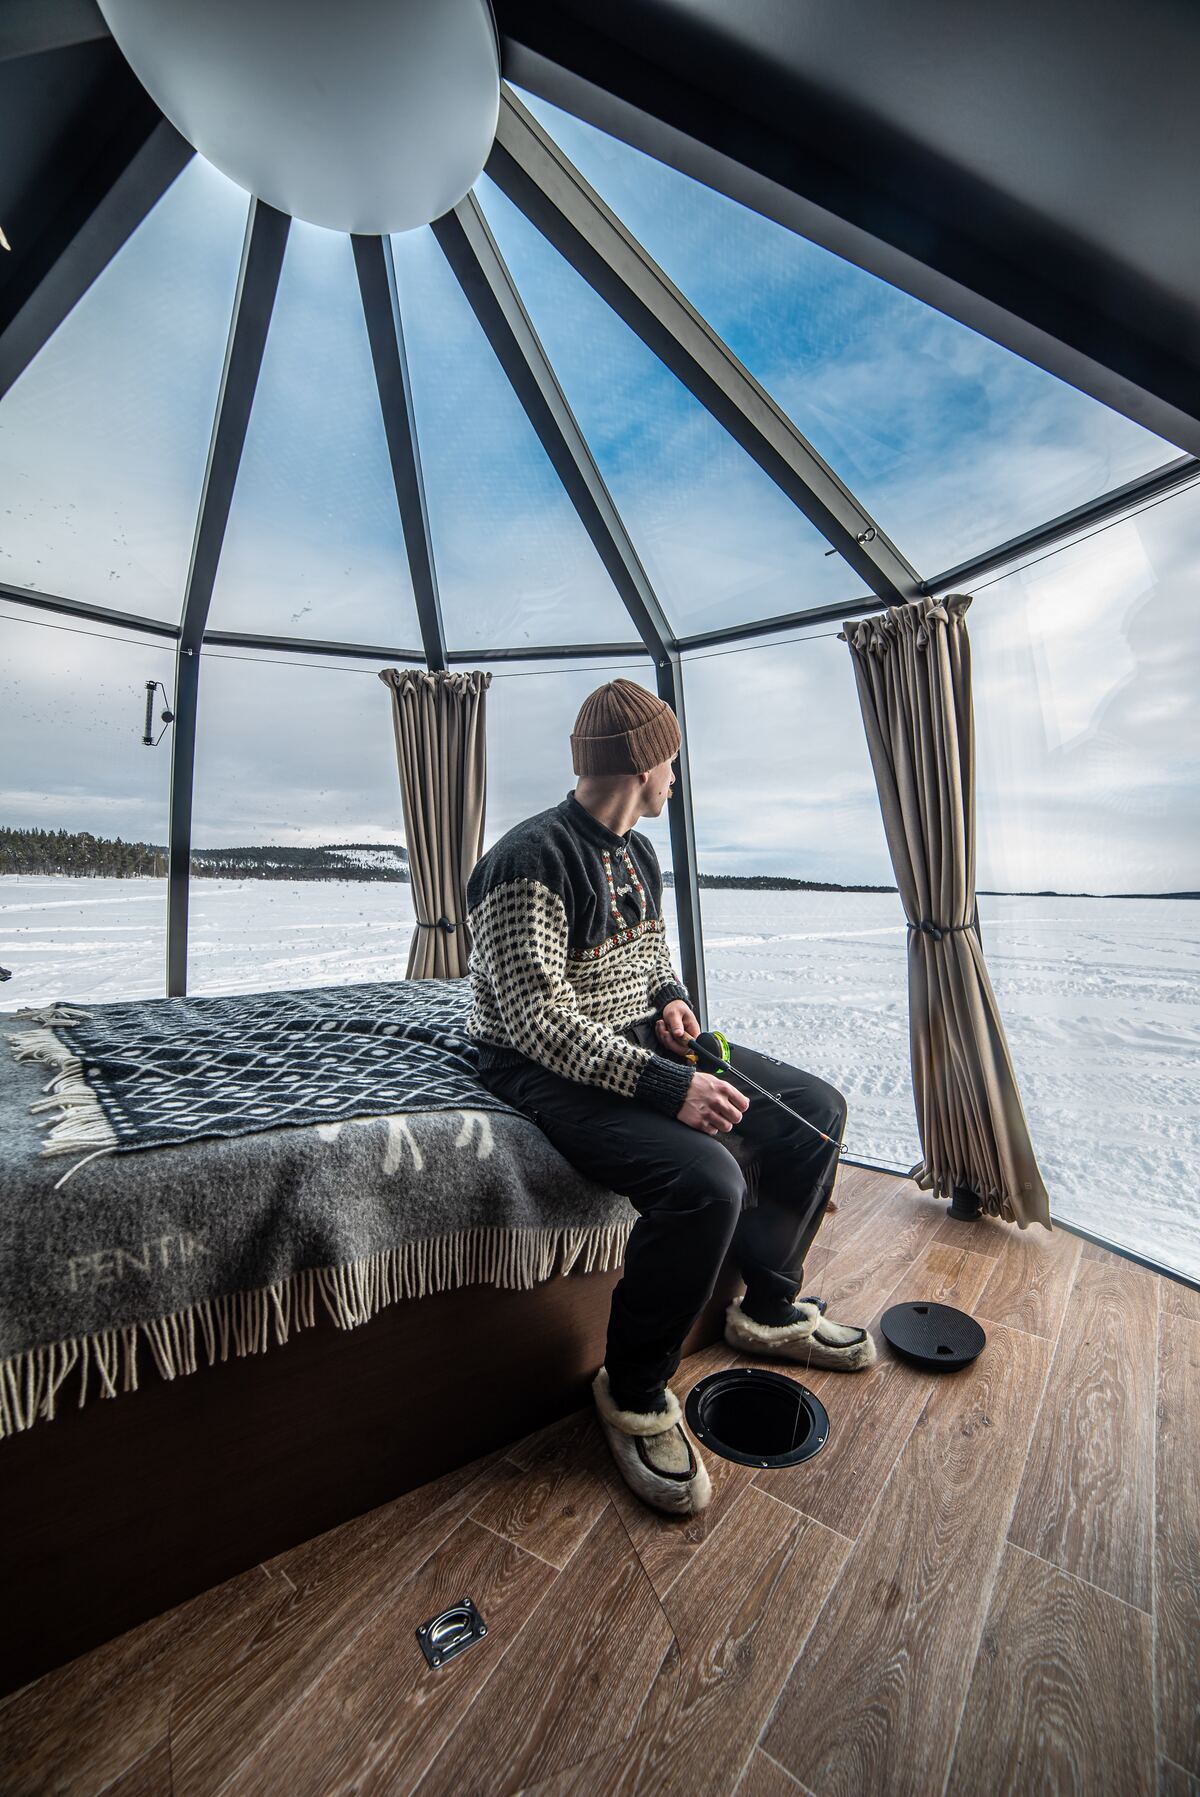 A person ice fishing inside a glass cabin